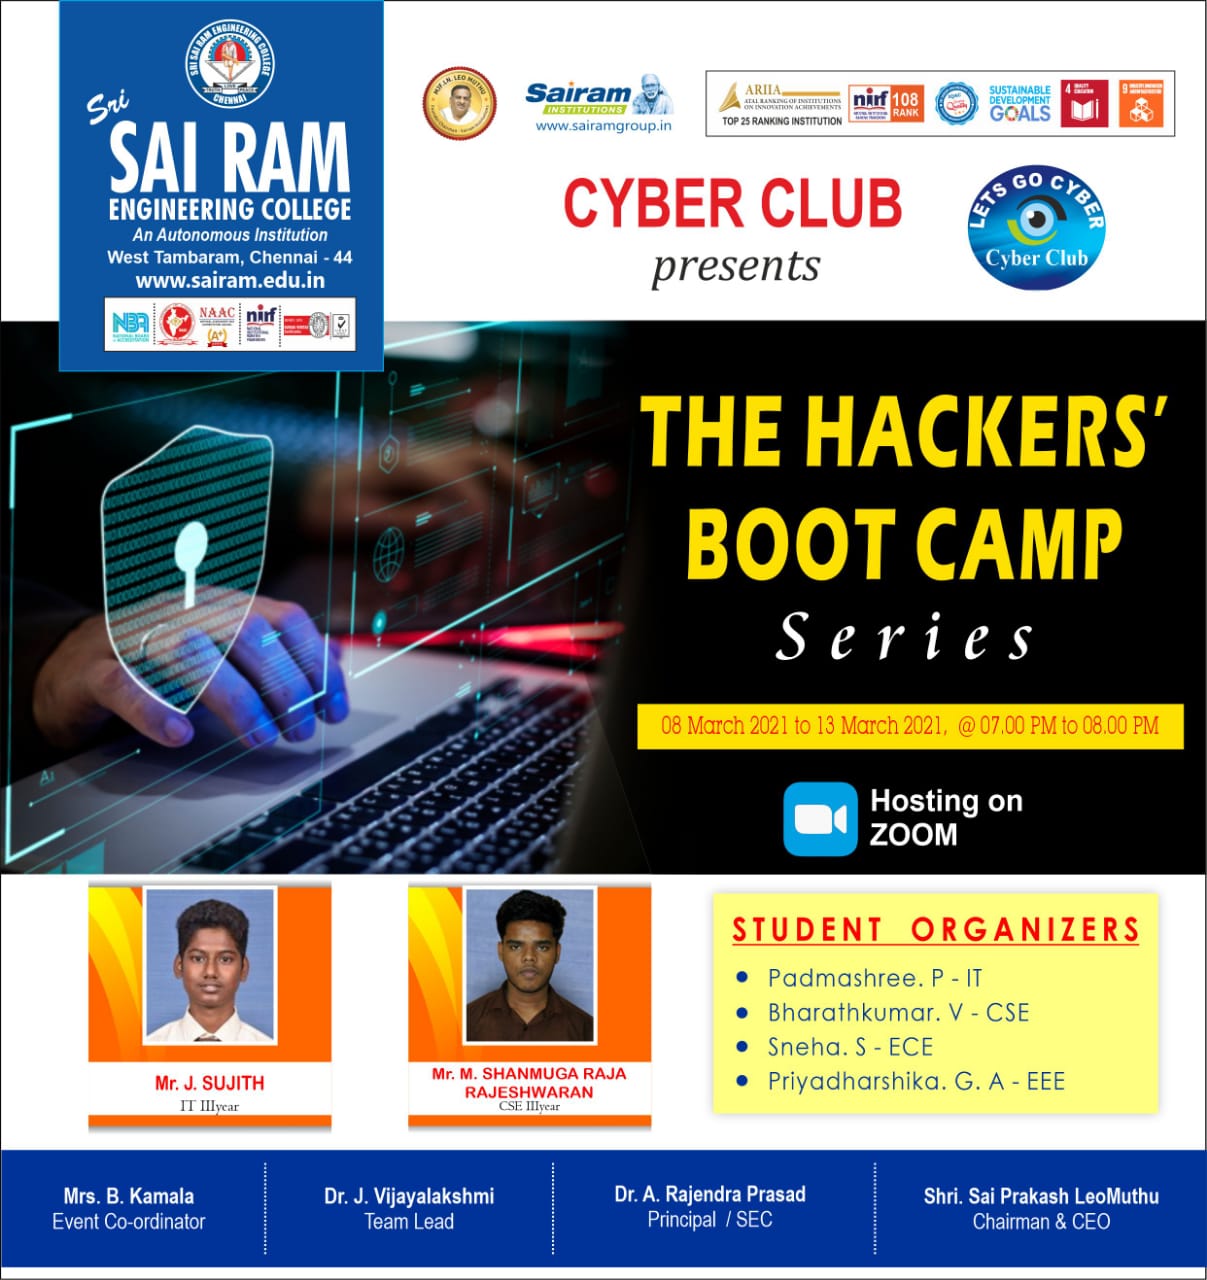 “Cyber Club is organizing “The Hackers’ Bootcamp Series” from 8th March 2021 to 13th March 2021 at 7pm and 8pm”